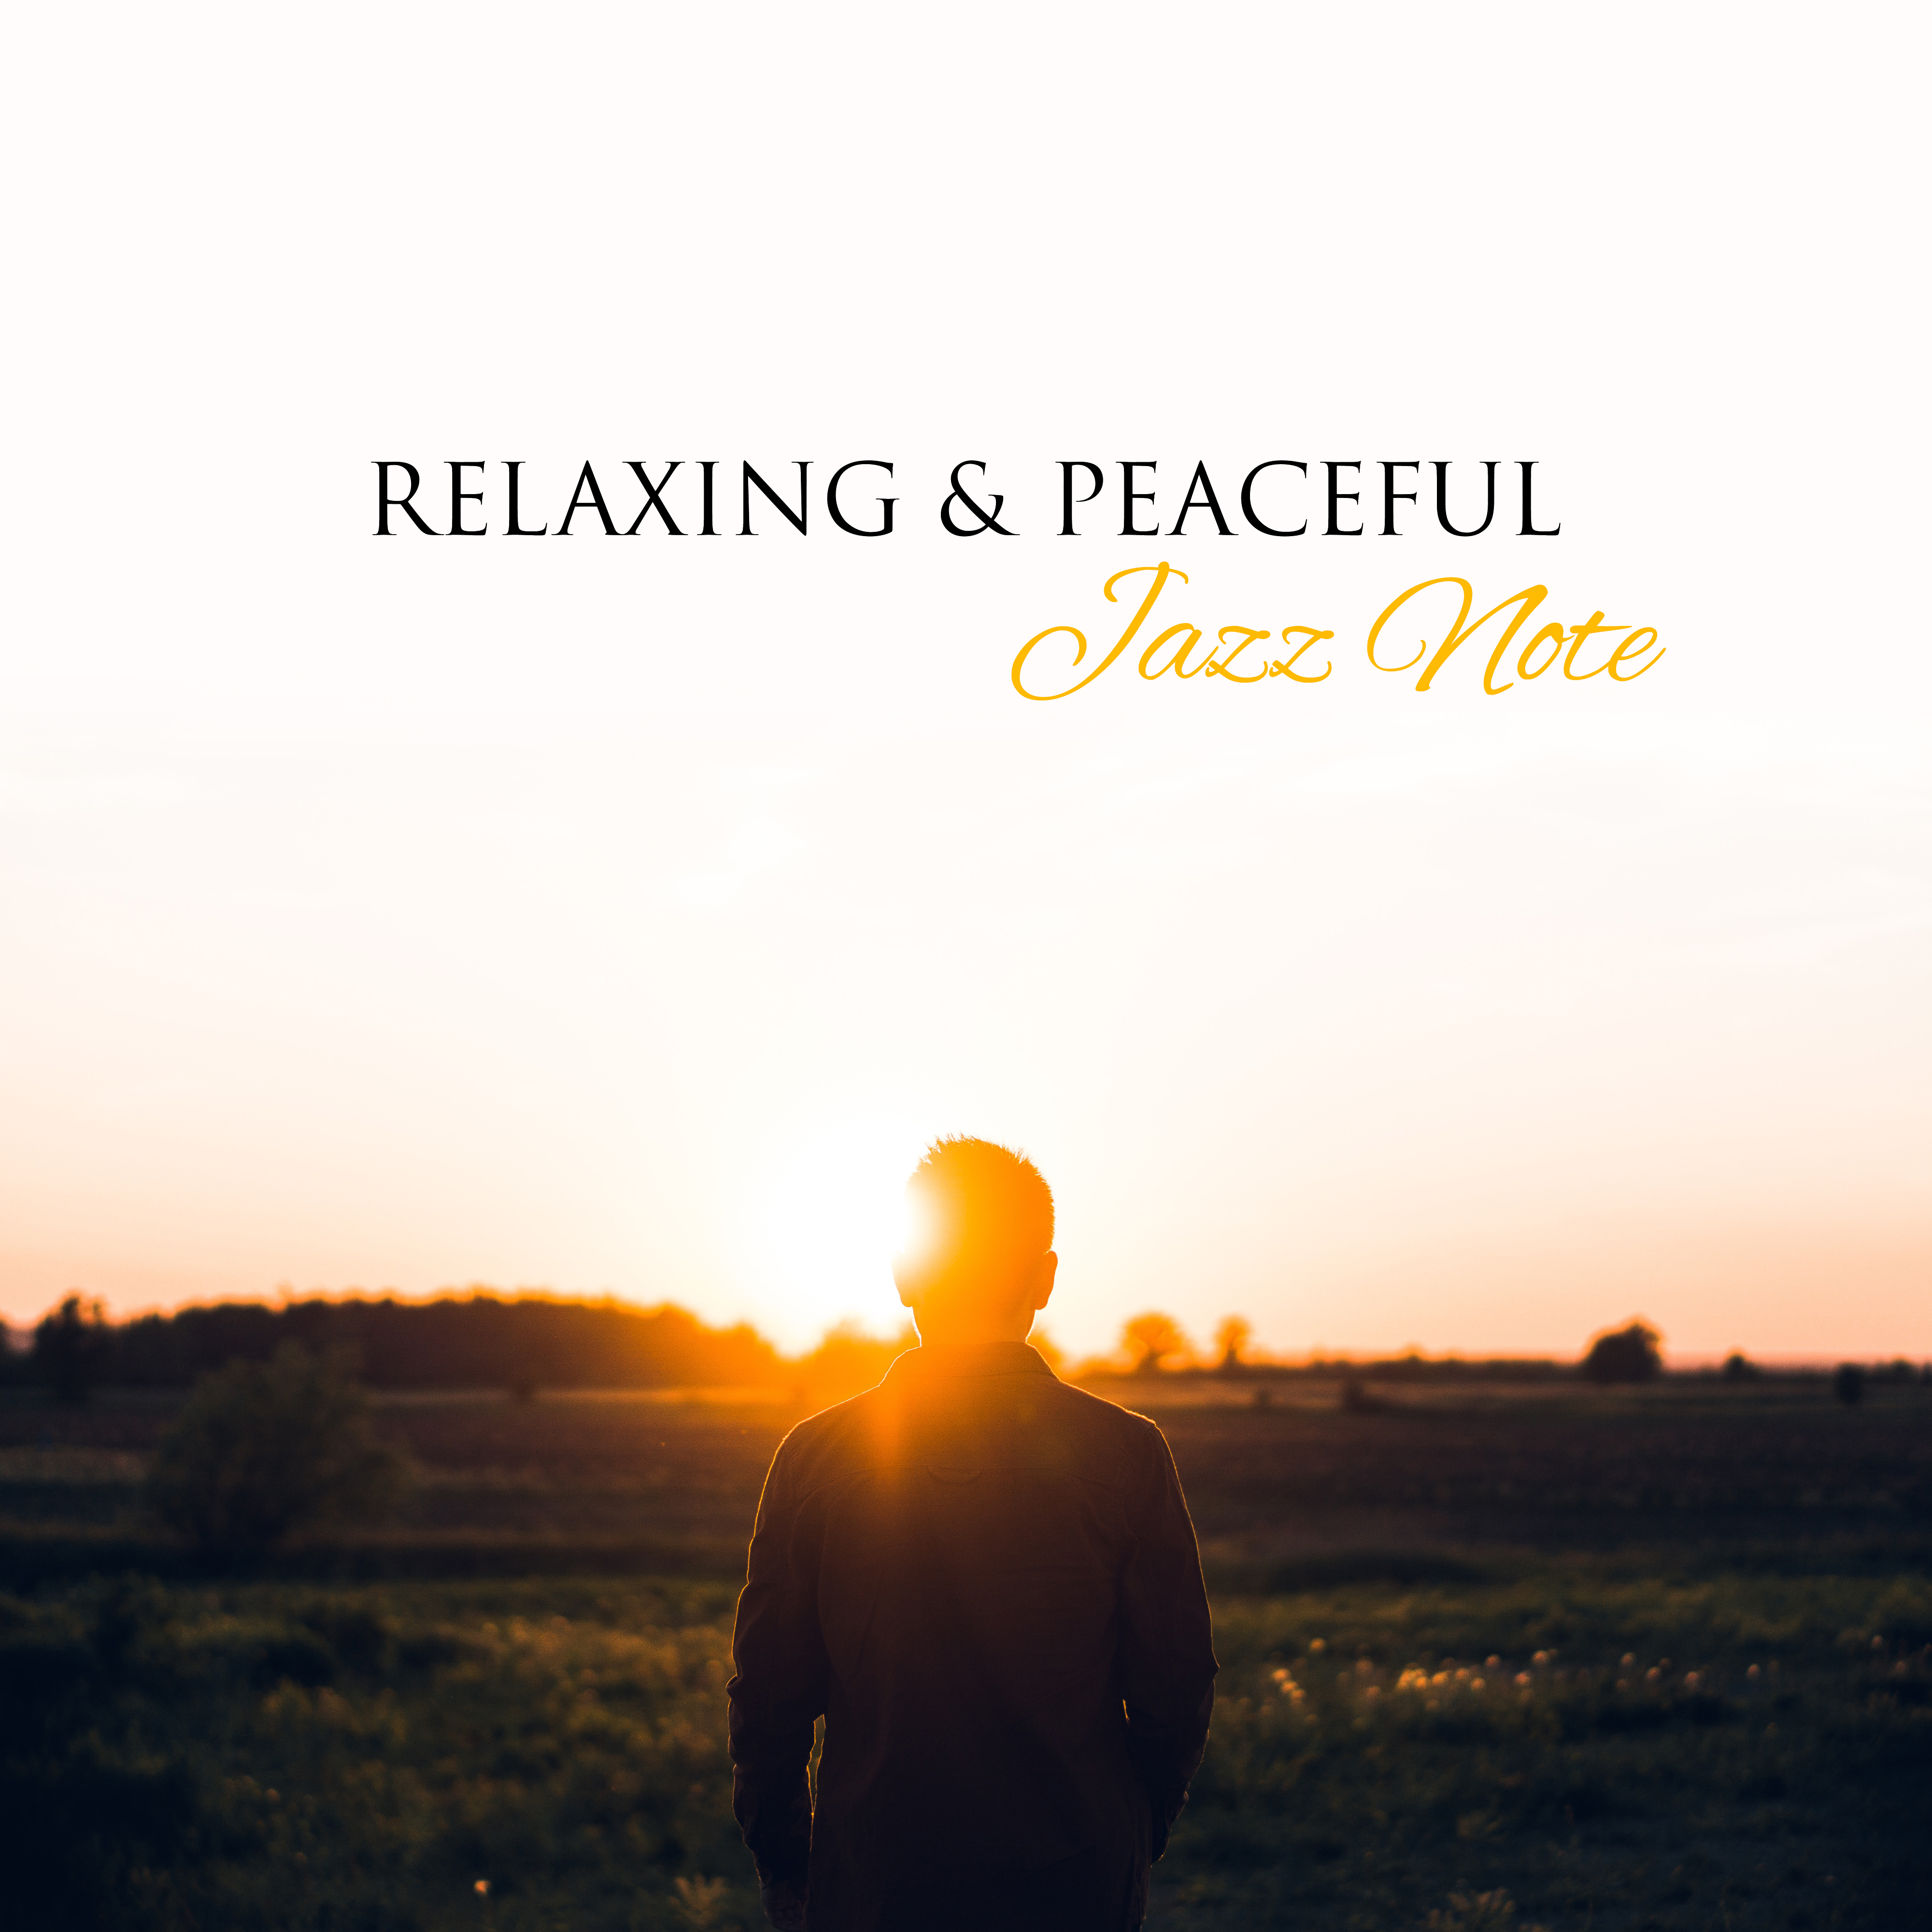 Relaxing  Peaceful Jazz Note  Soft Sounds to Relax, Night Jazz Club, Rest a Bit, Calm Melodies